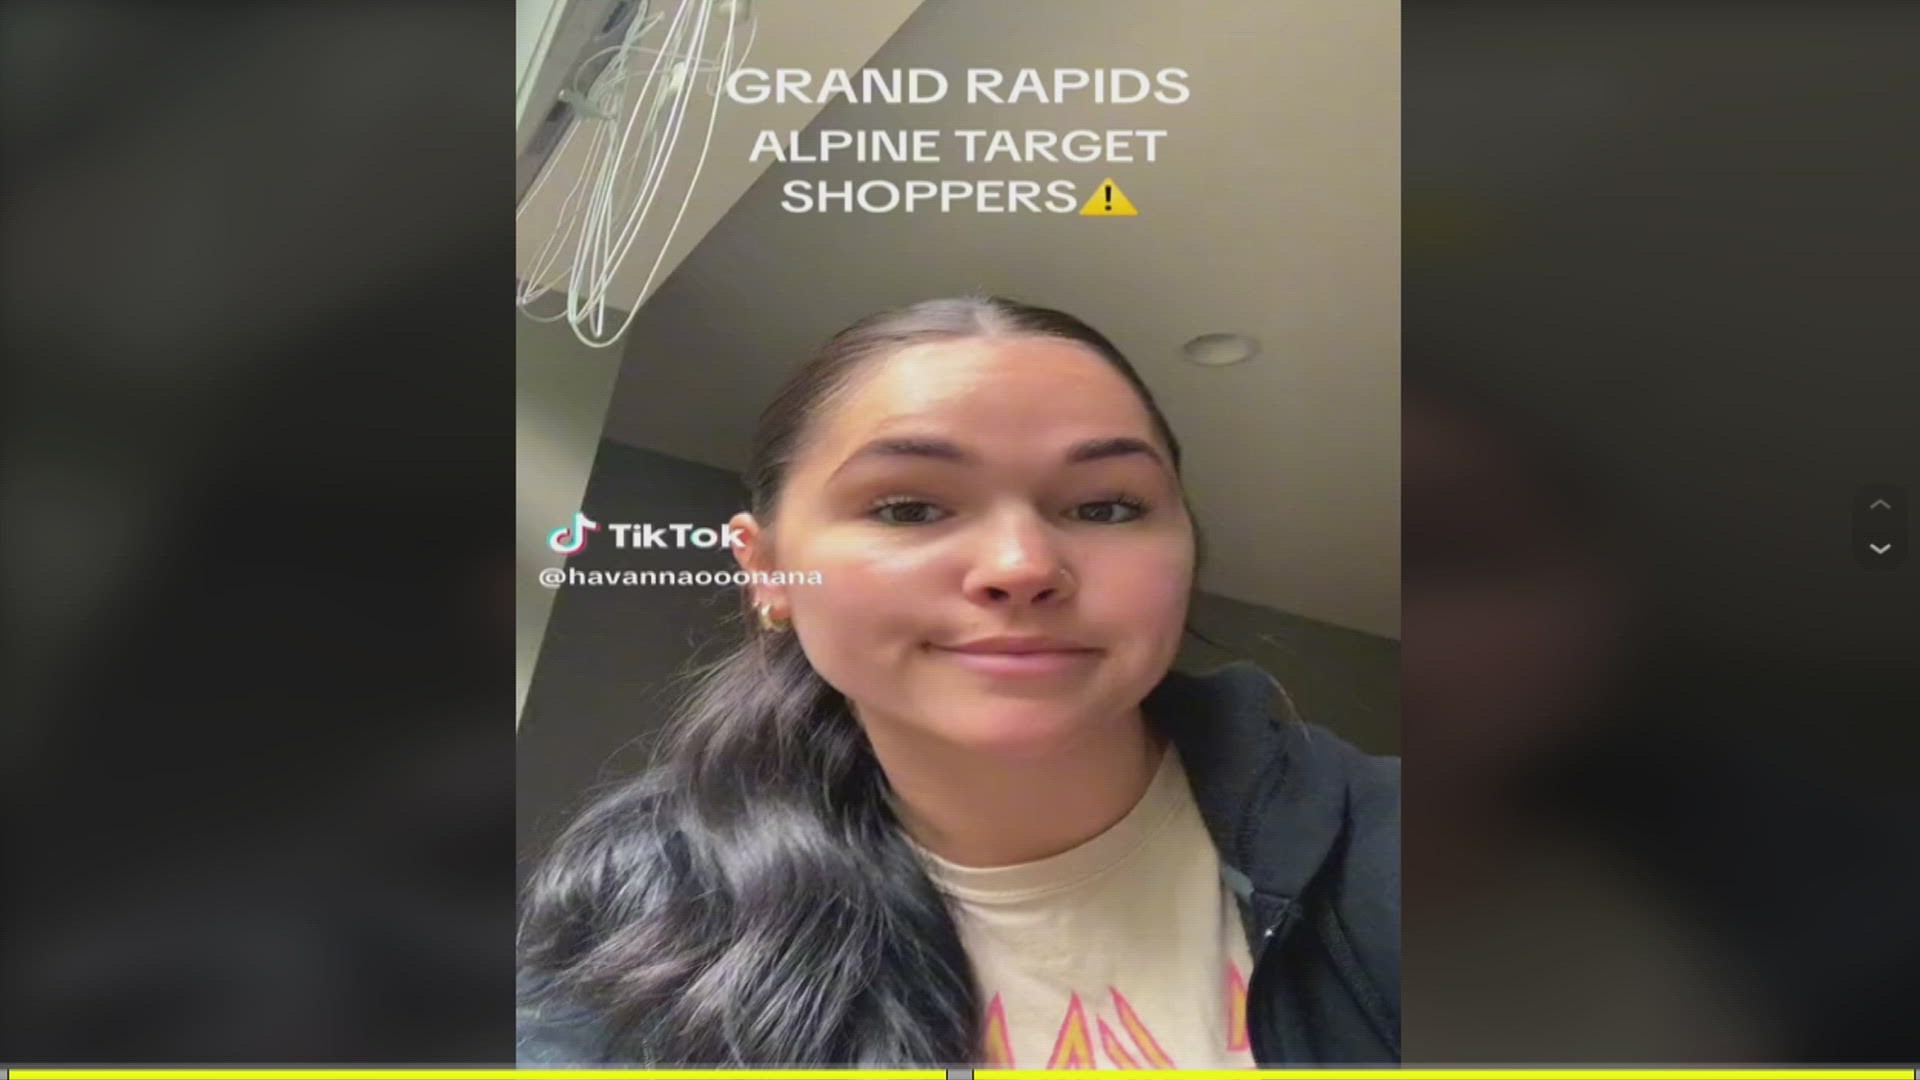 A woman says she felt violated after someone pointed a camera at her while in a dressing room at the Target on Alpine Avenue in Walker.